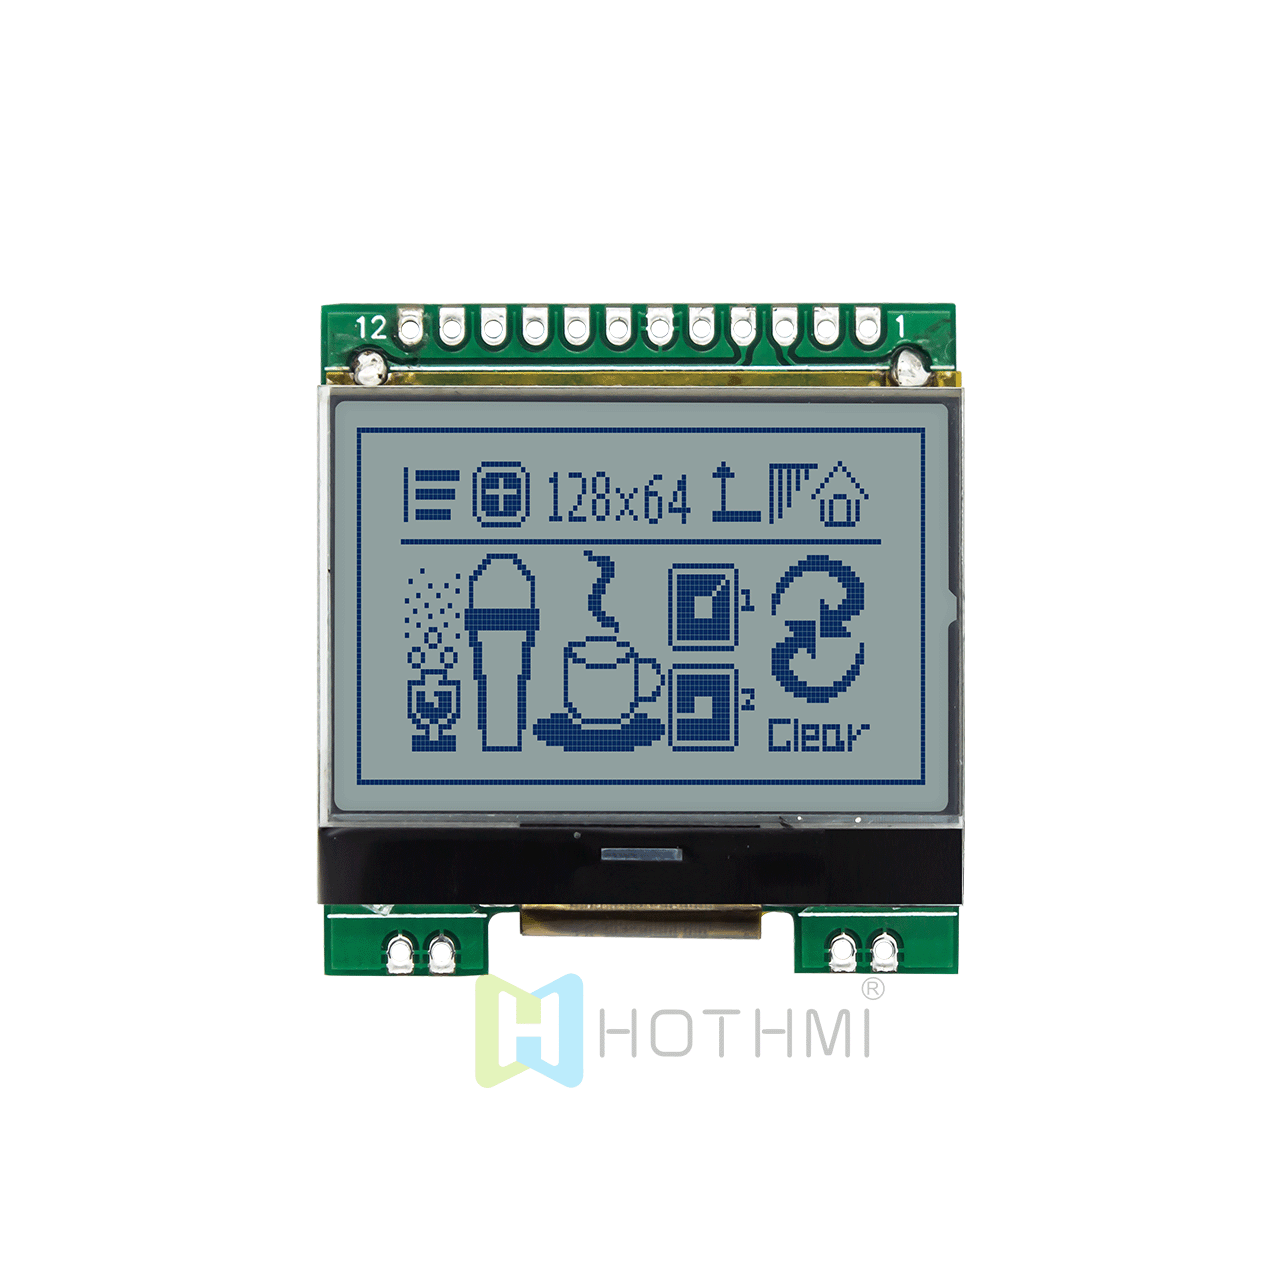 1.7"LCD12864, low price 128x64 gray background blue letter module, graphic COB module, supports 3.3V/5V, ST7567 controller